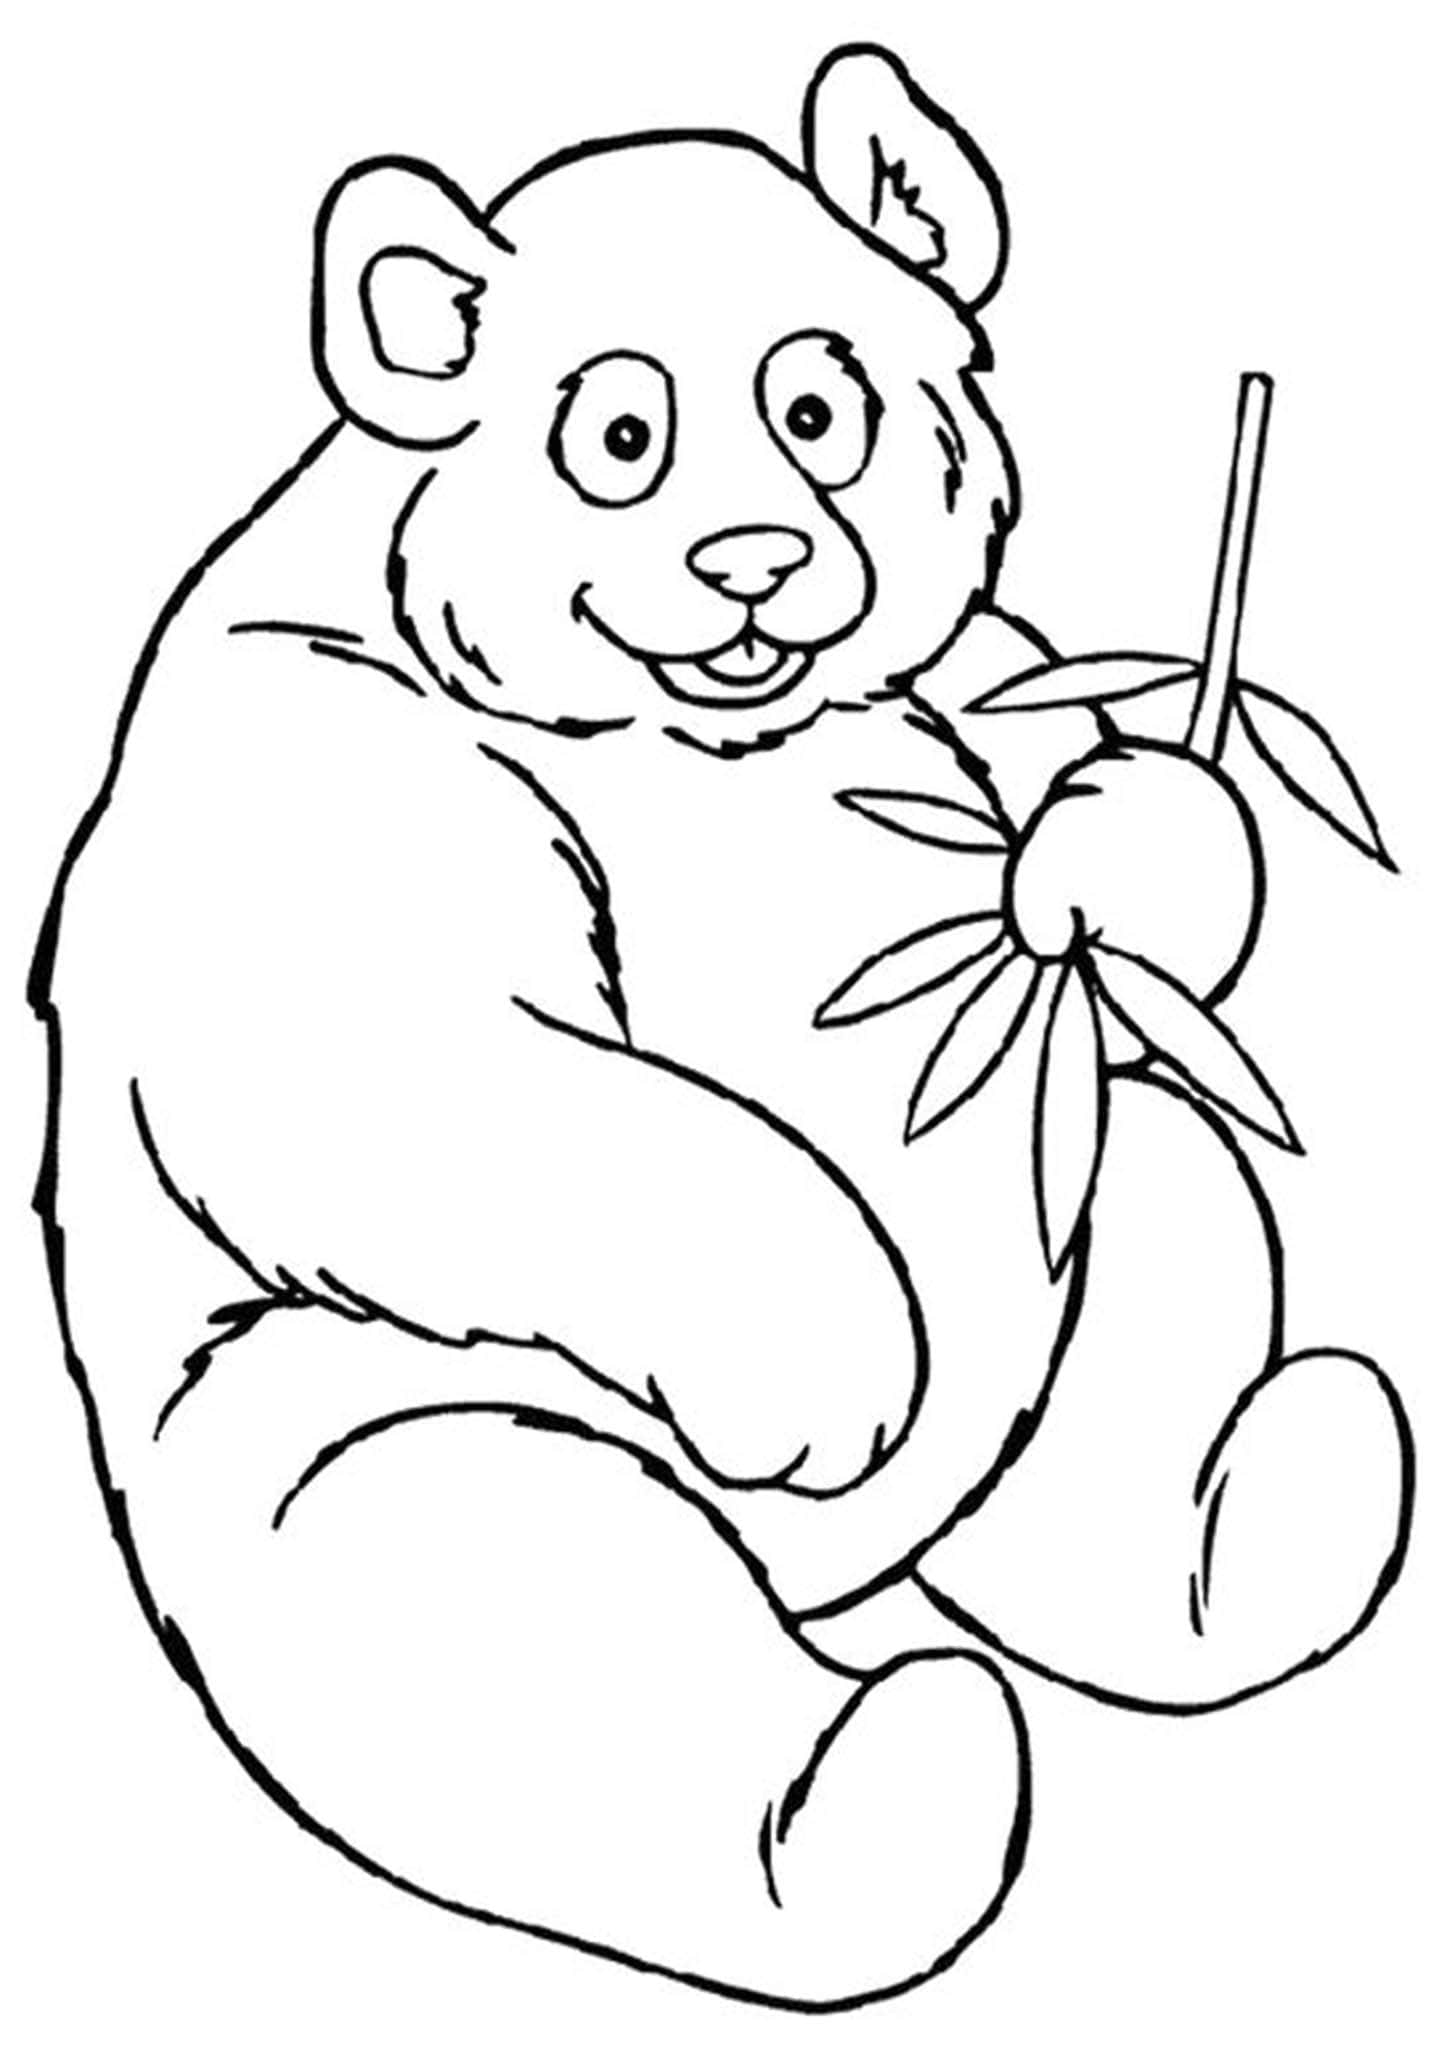 panda-printable-coloring-pages-customize-and-print